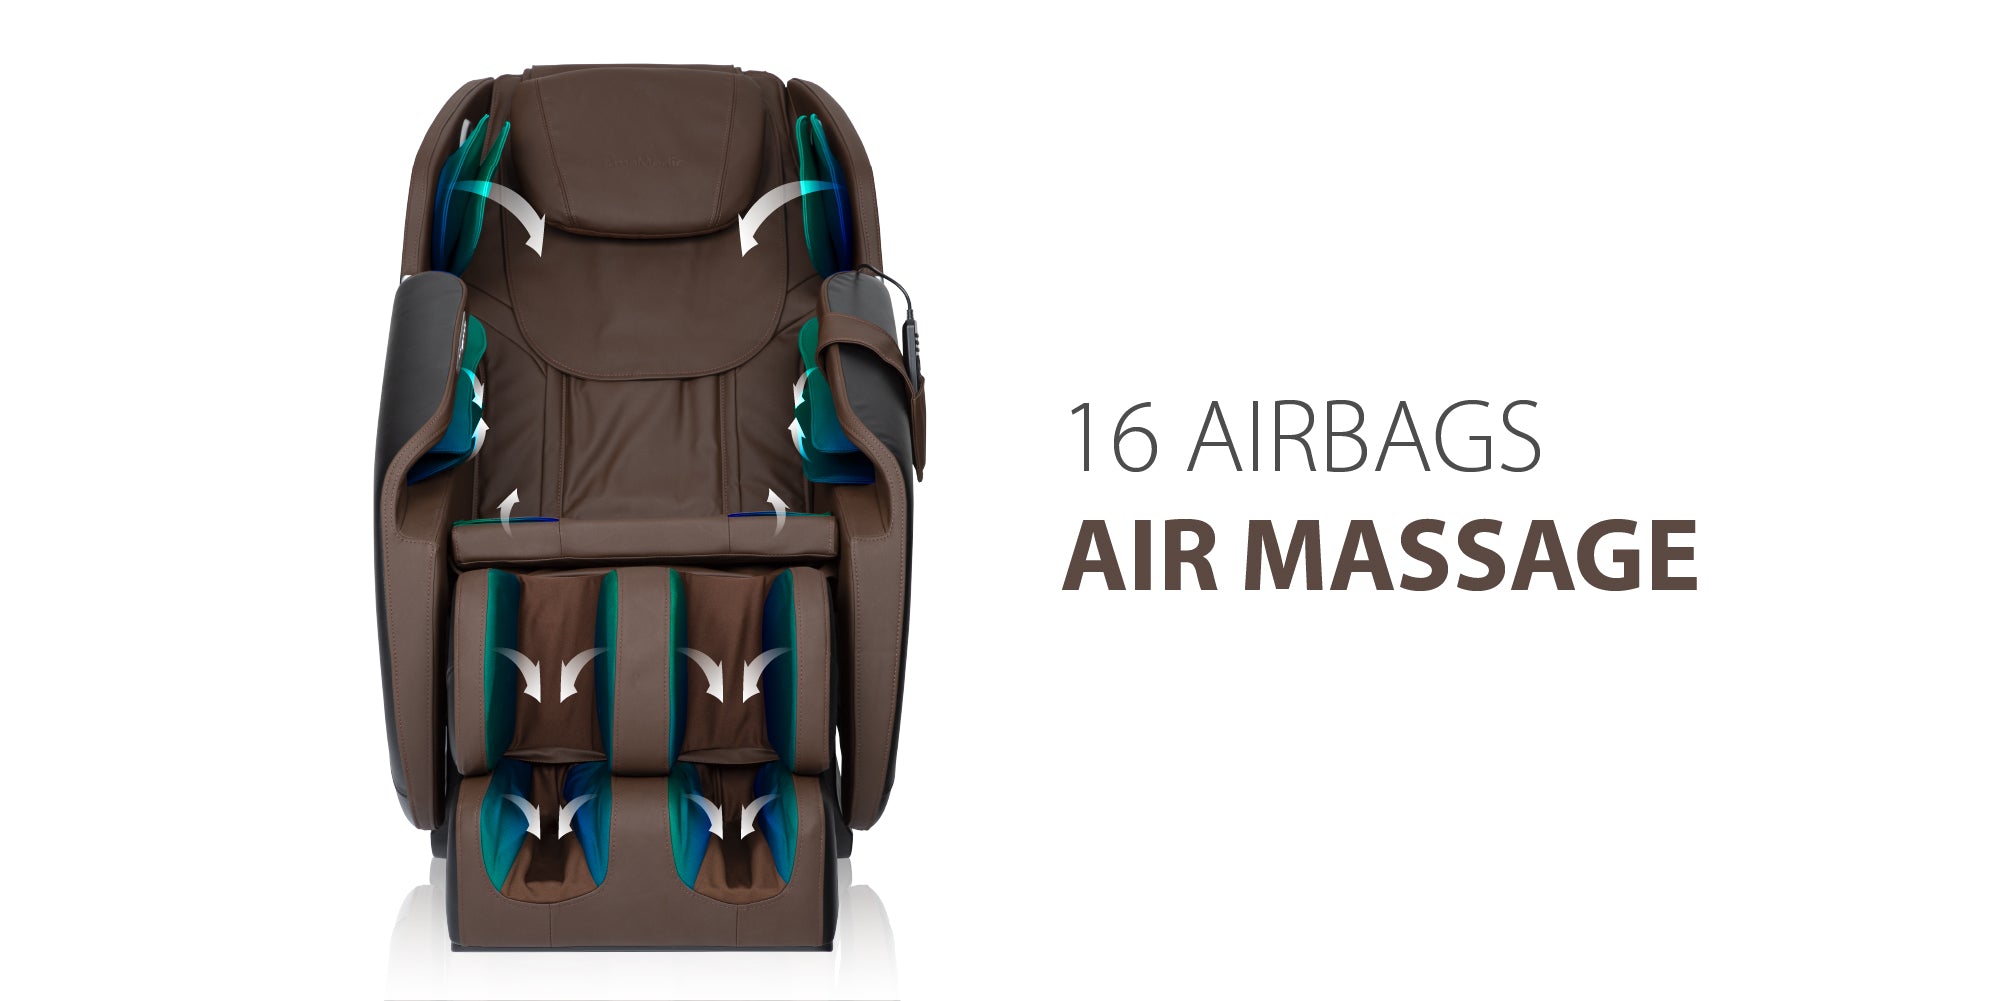 16 Airbags Air Massage